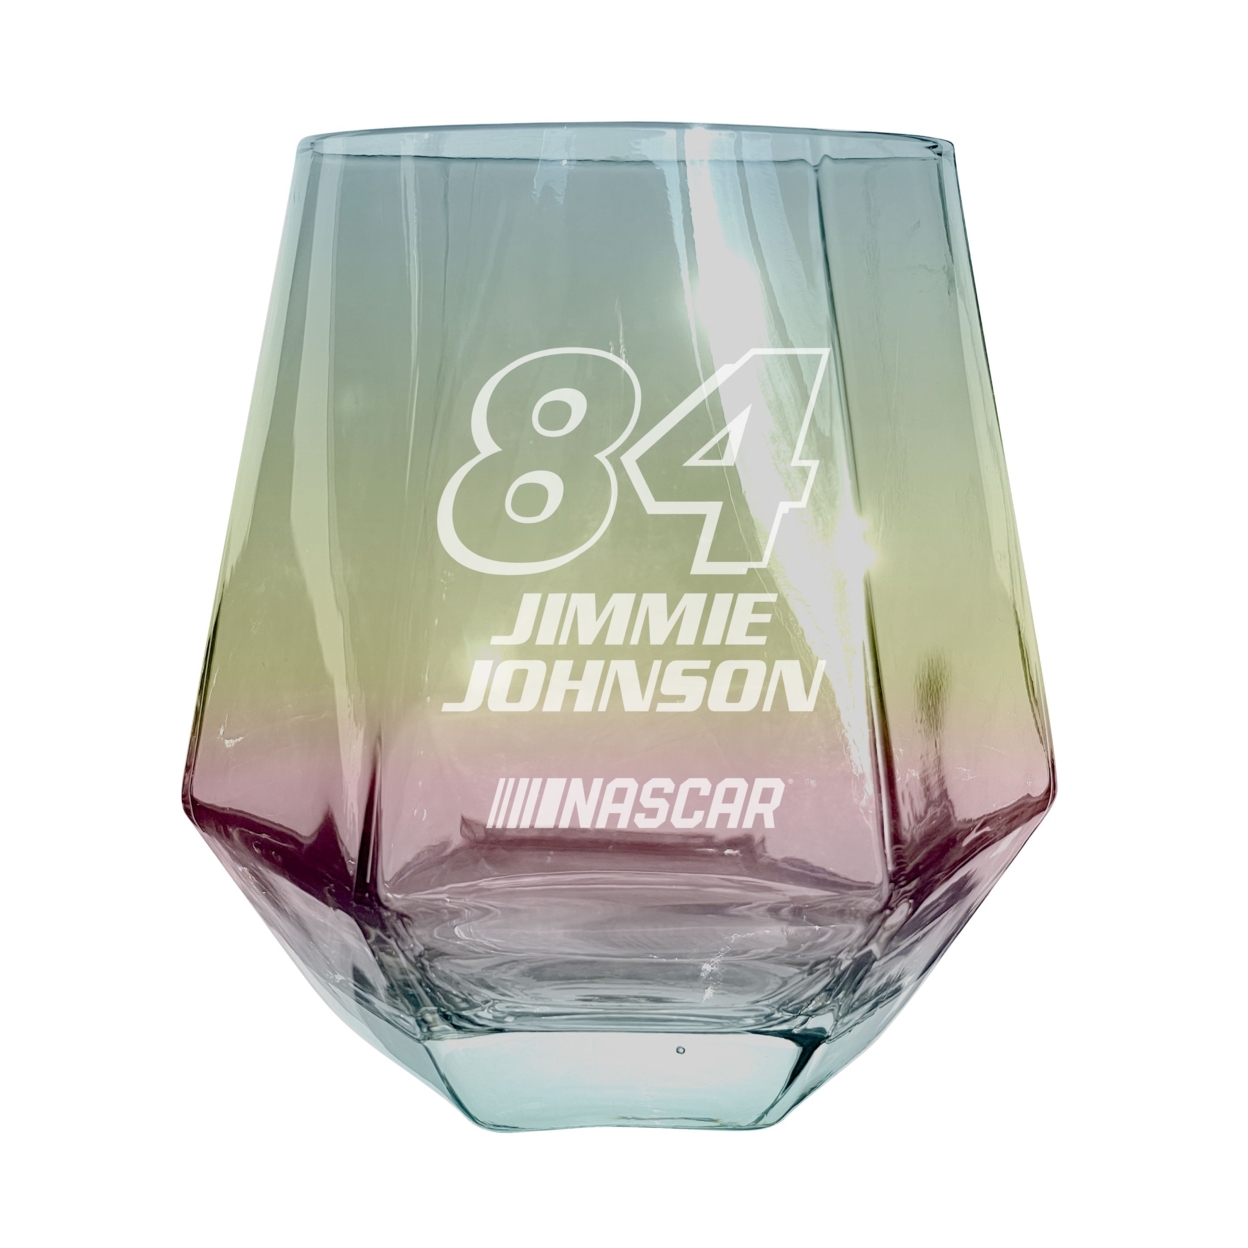 #84 Jimmie Johnson Officially Licensed 10 Oz Engraved Diamond Wine Glass - Grey, Single